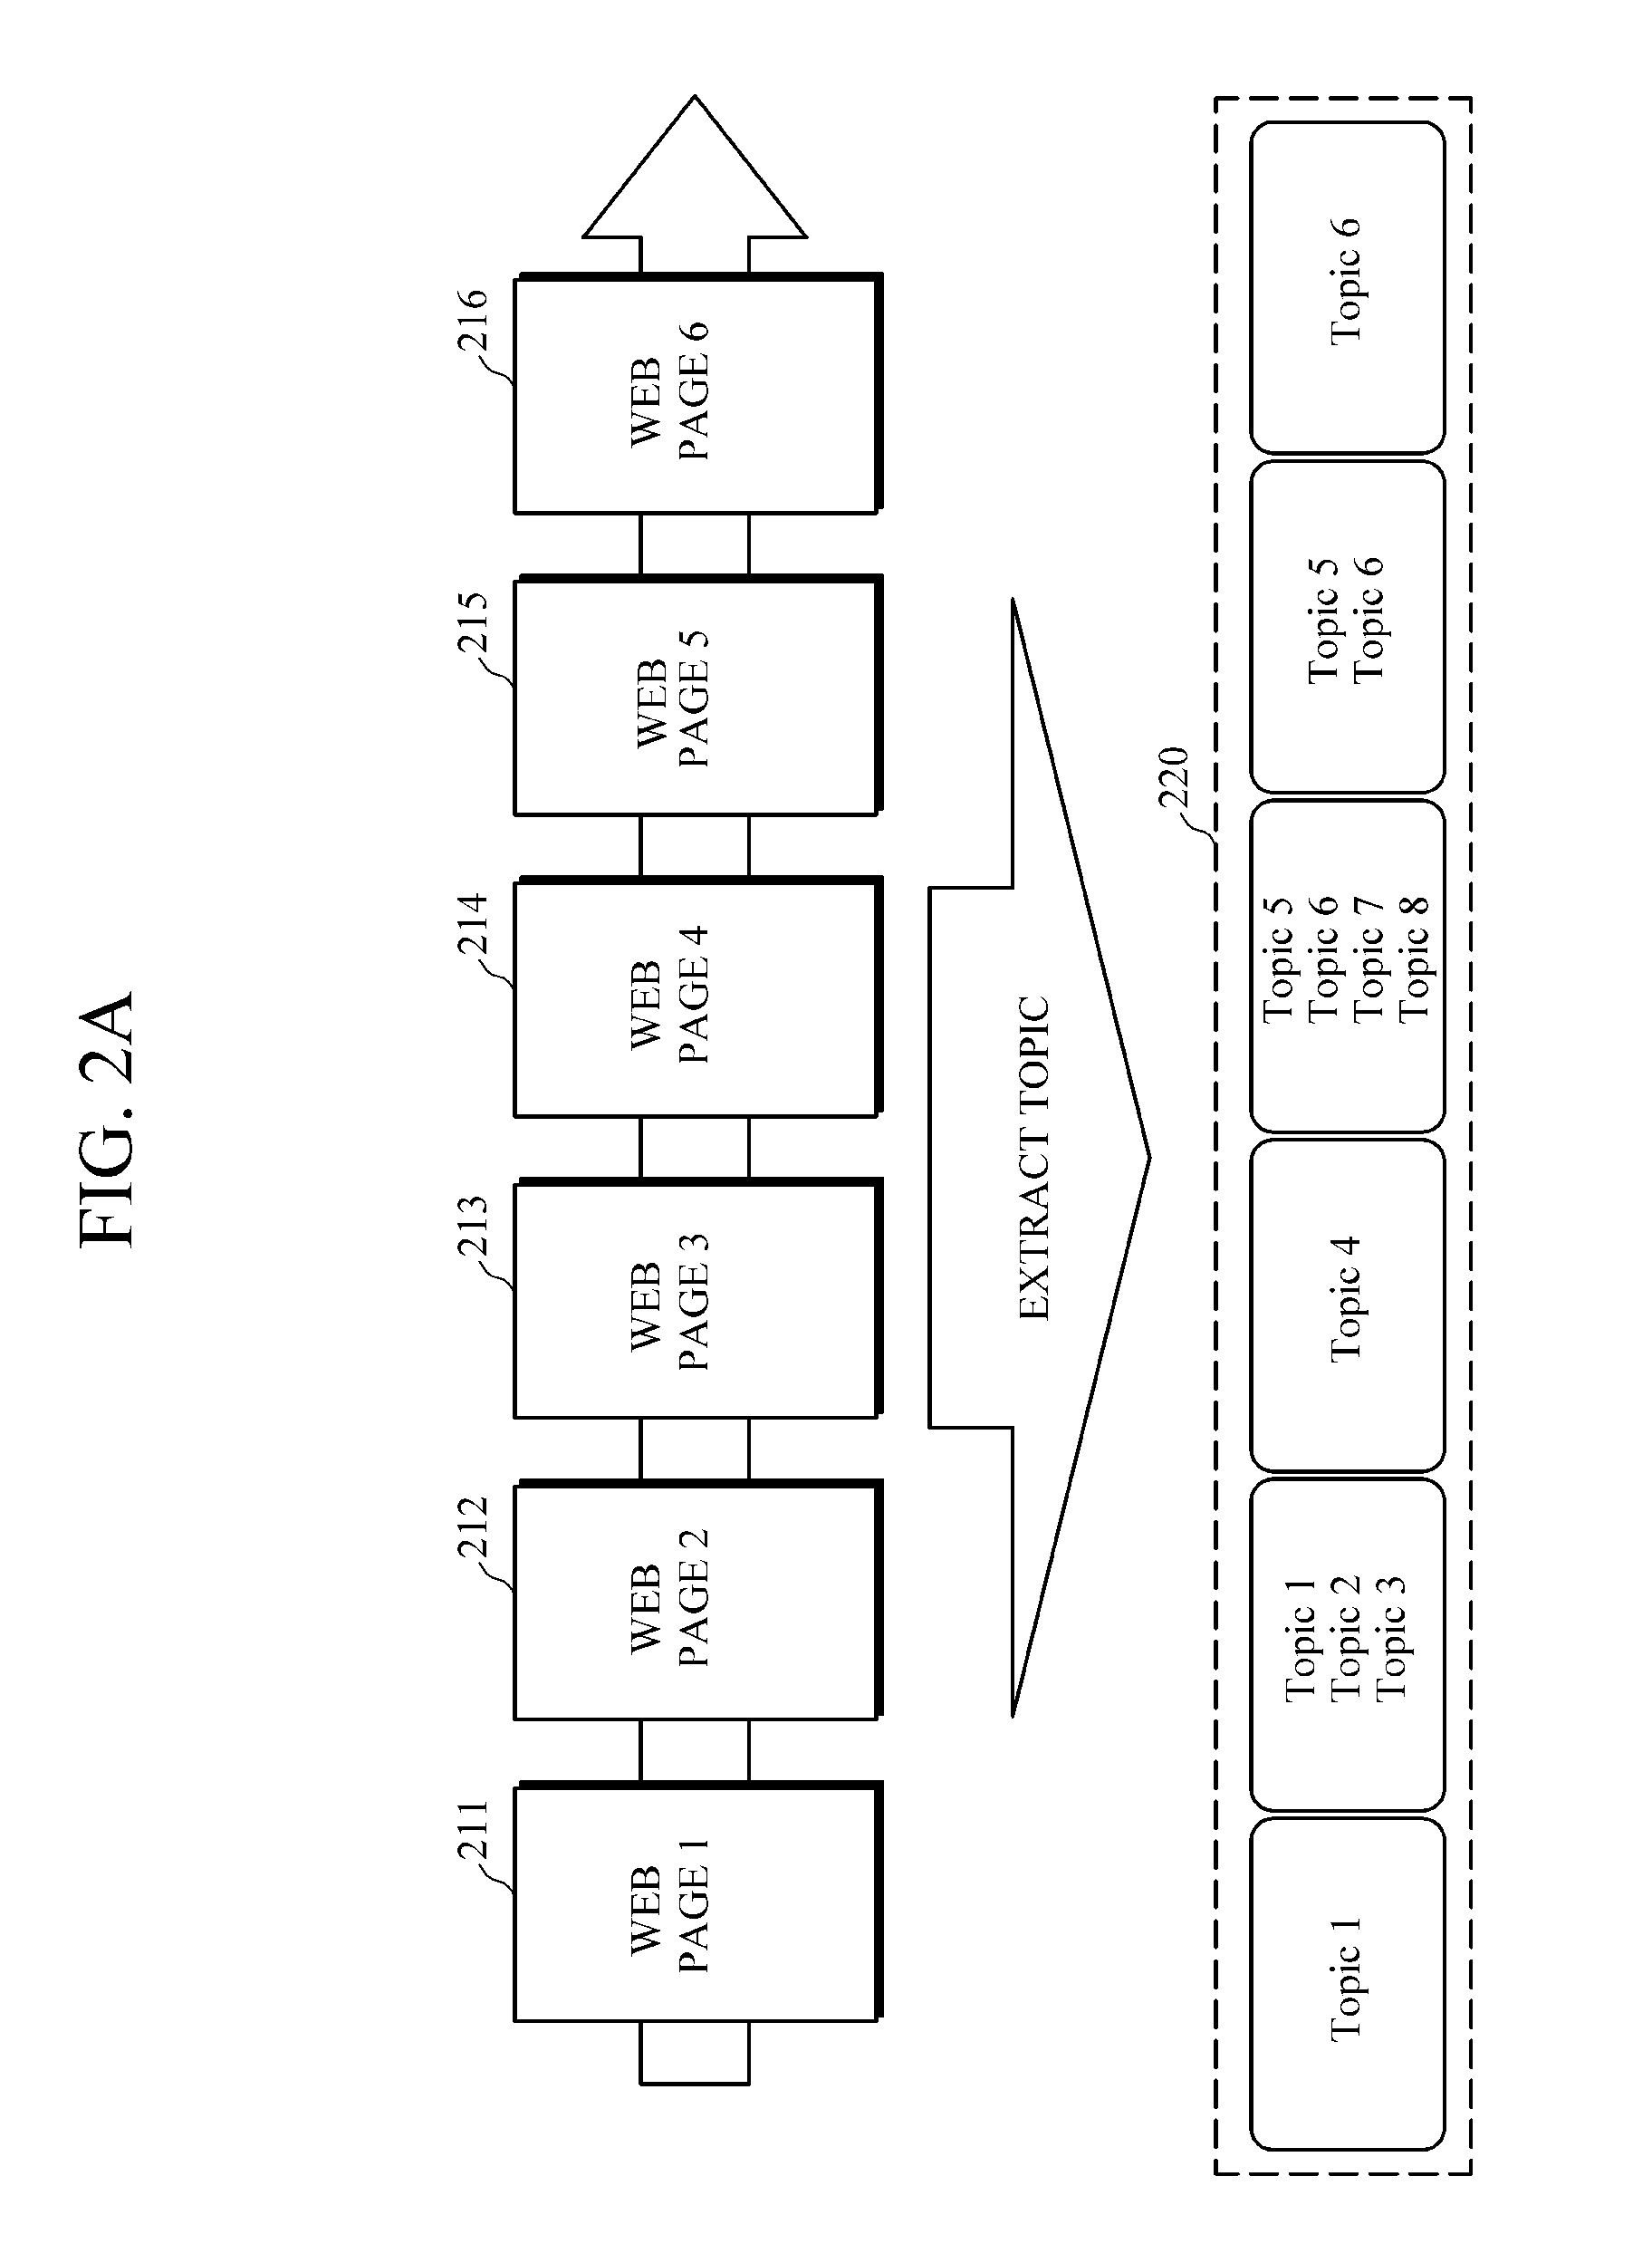 Apparatus and method for web page access